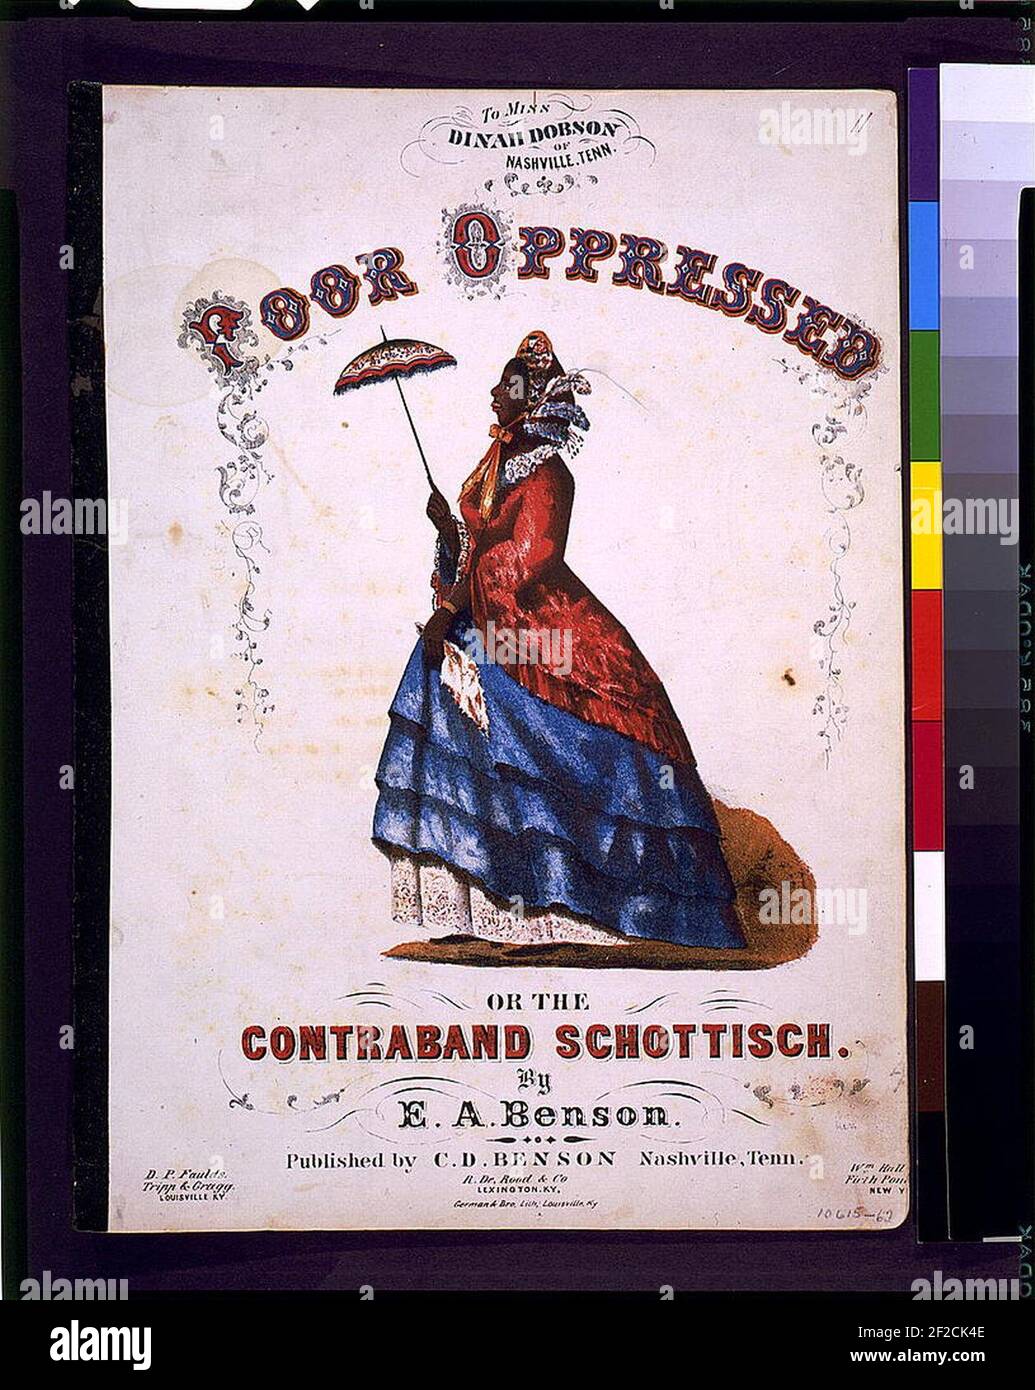 Poor oppressed or the contraband Schottisch, by E.A. Benson - German & Bro. lith., Louisville, Ky. Stock Photo